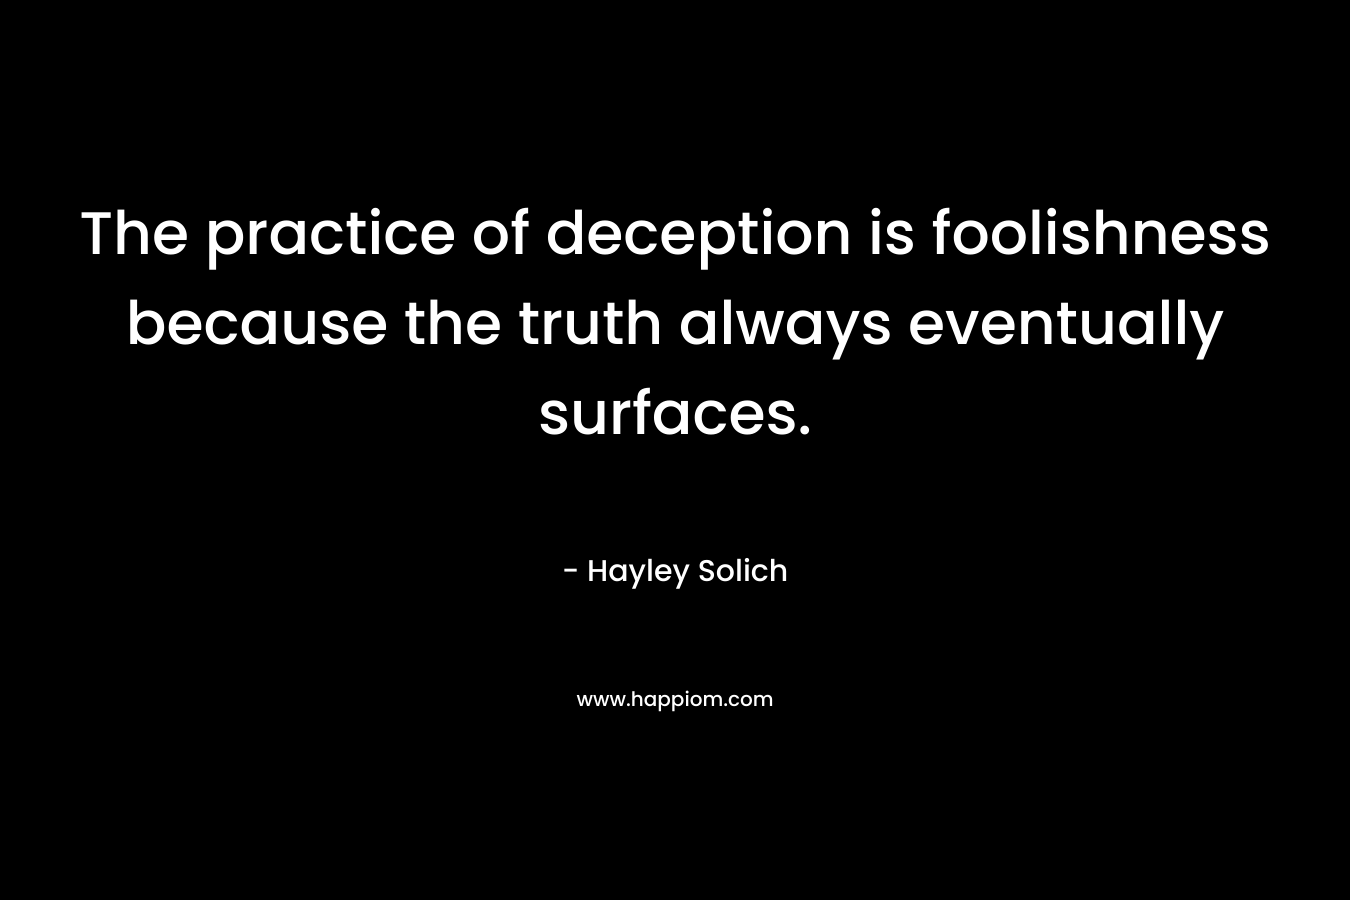 The practice of deception is foolishness because the truth always eventually surfaces.